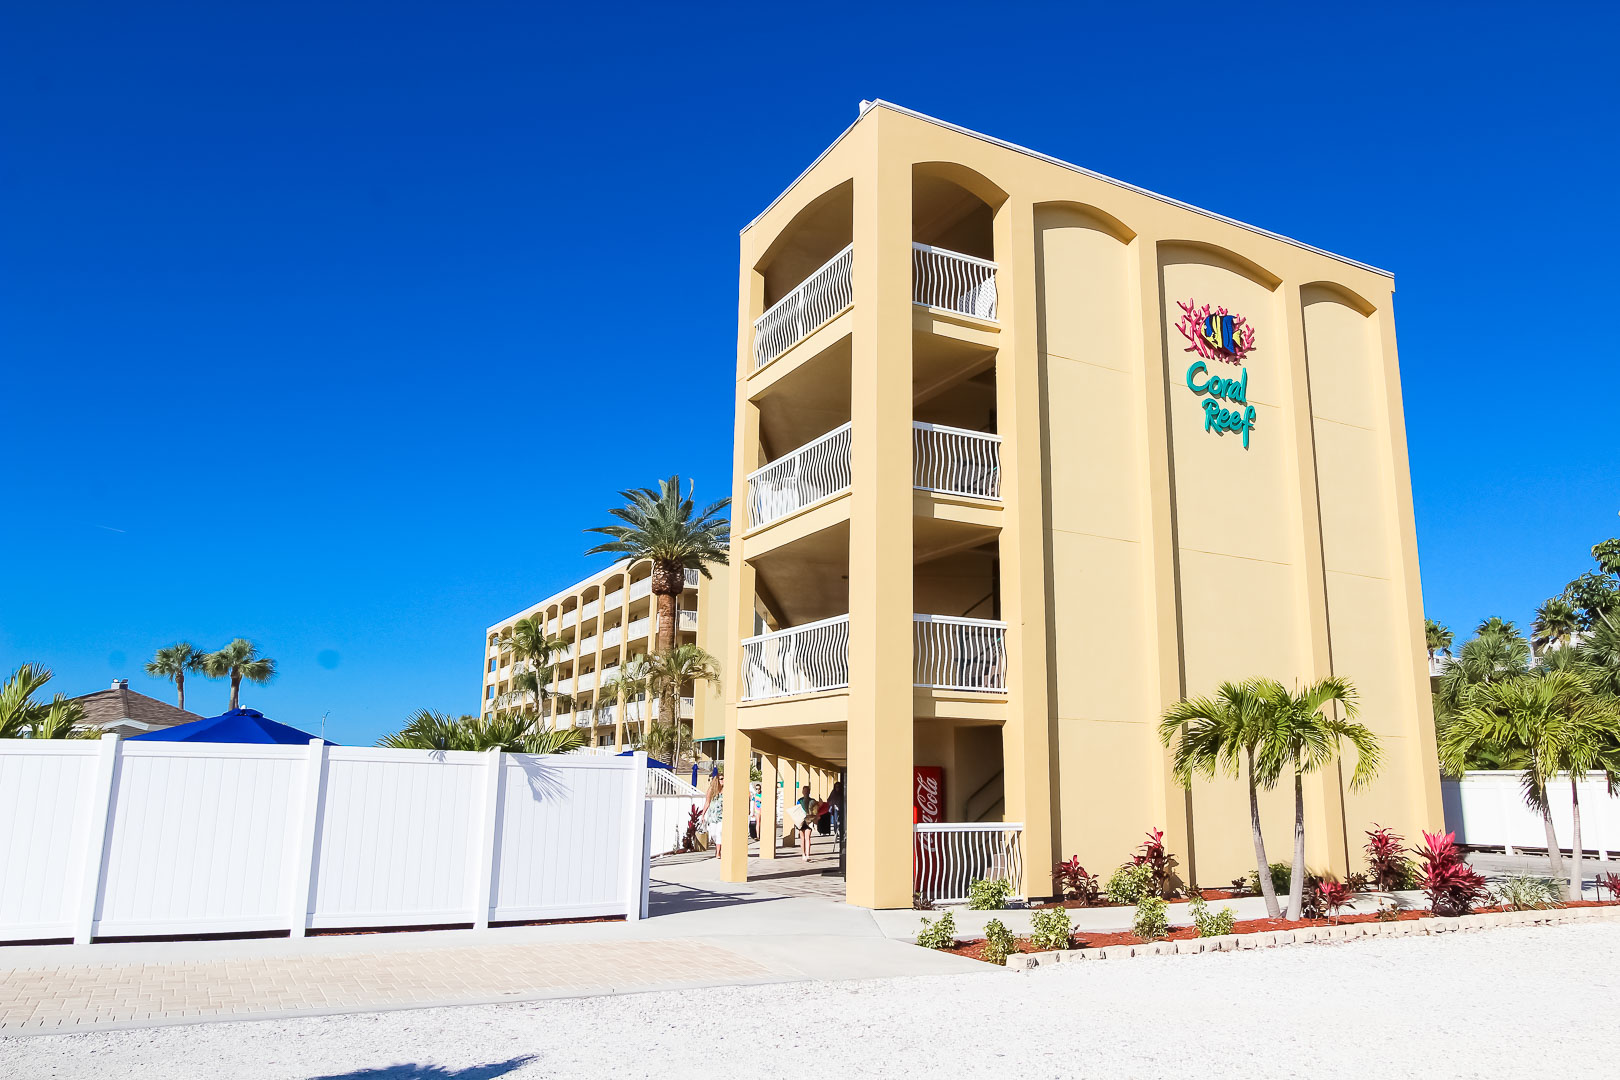 A view of the exterior building of VRI's Coral Reef Beach Resort in St. Pete Beach, Florida.